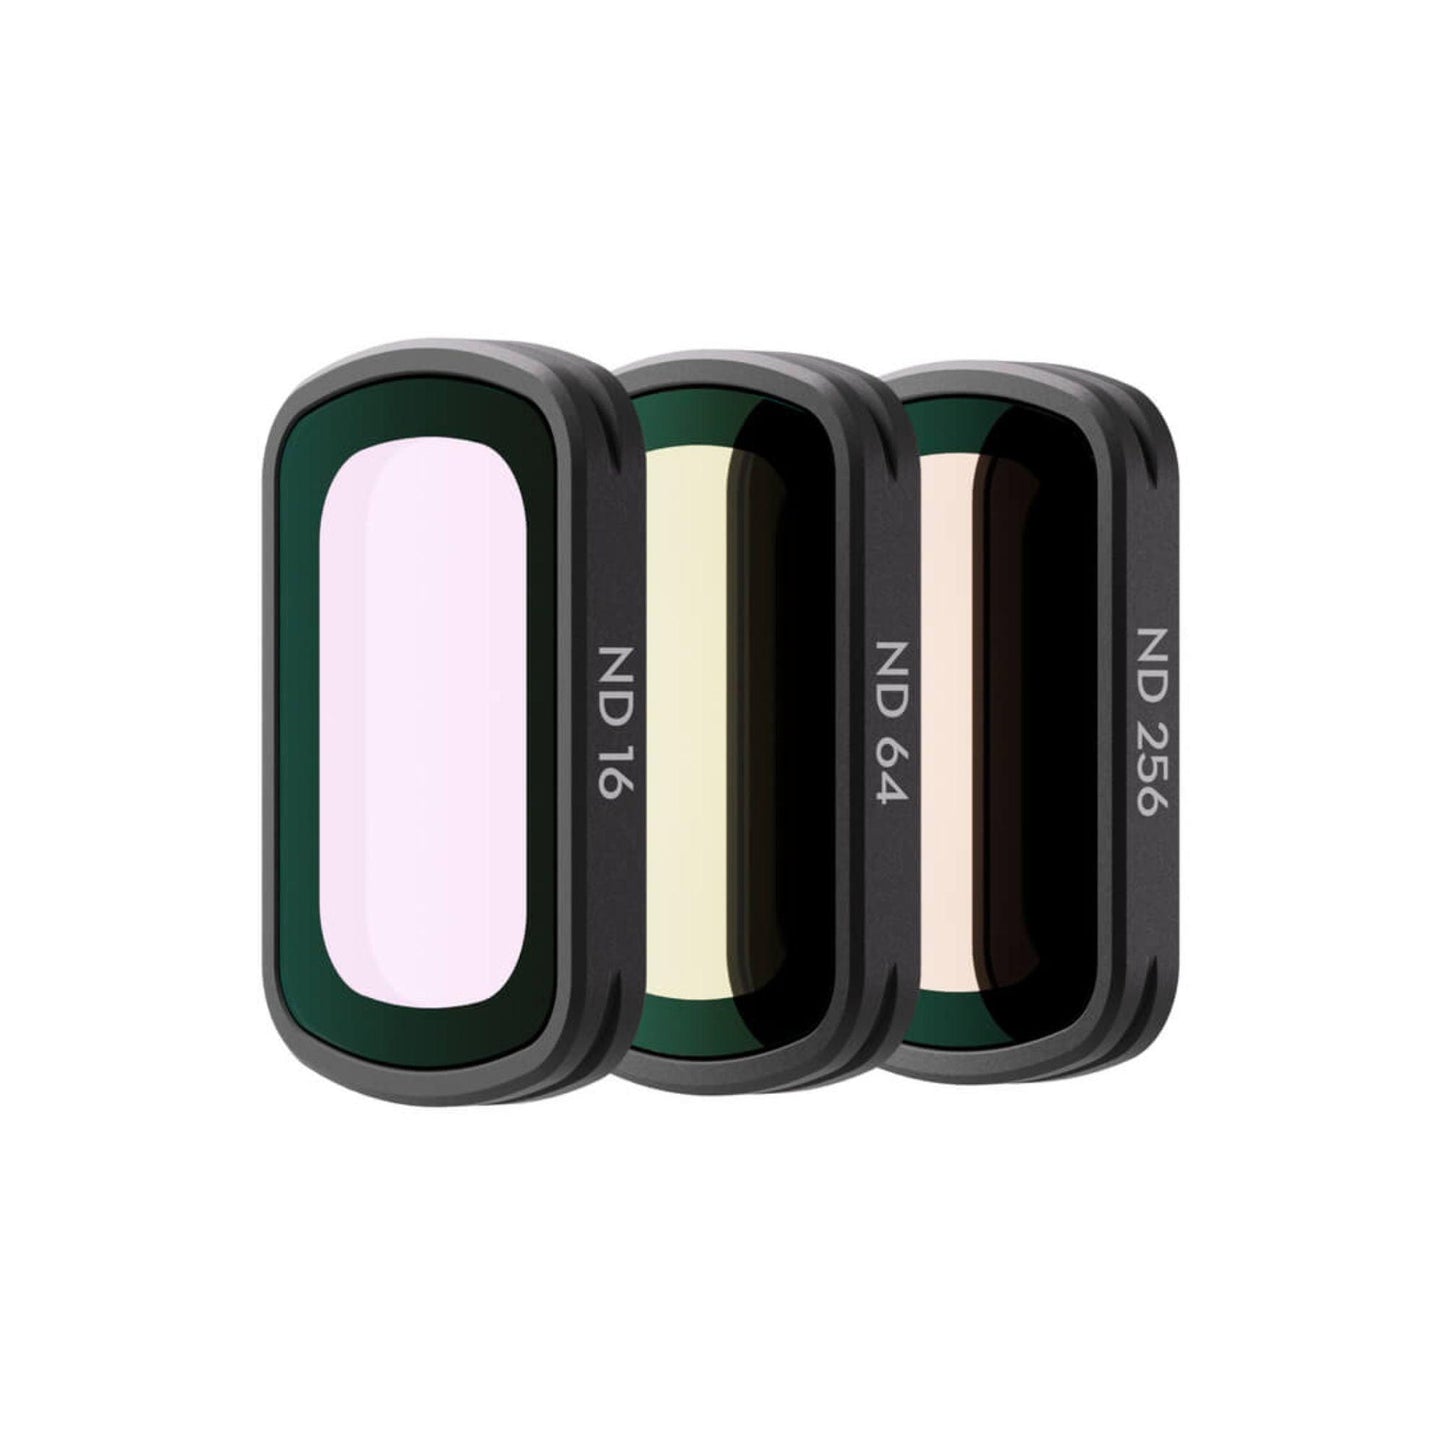 Osmo Pocket 3 Magnetic ND Filters Set - Silverlight Optics